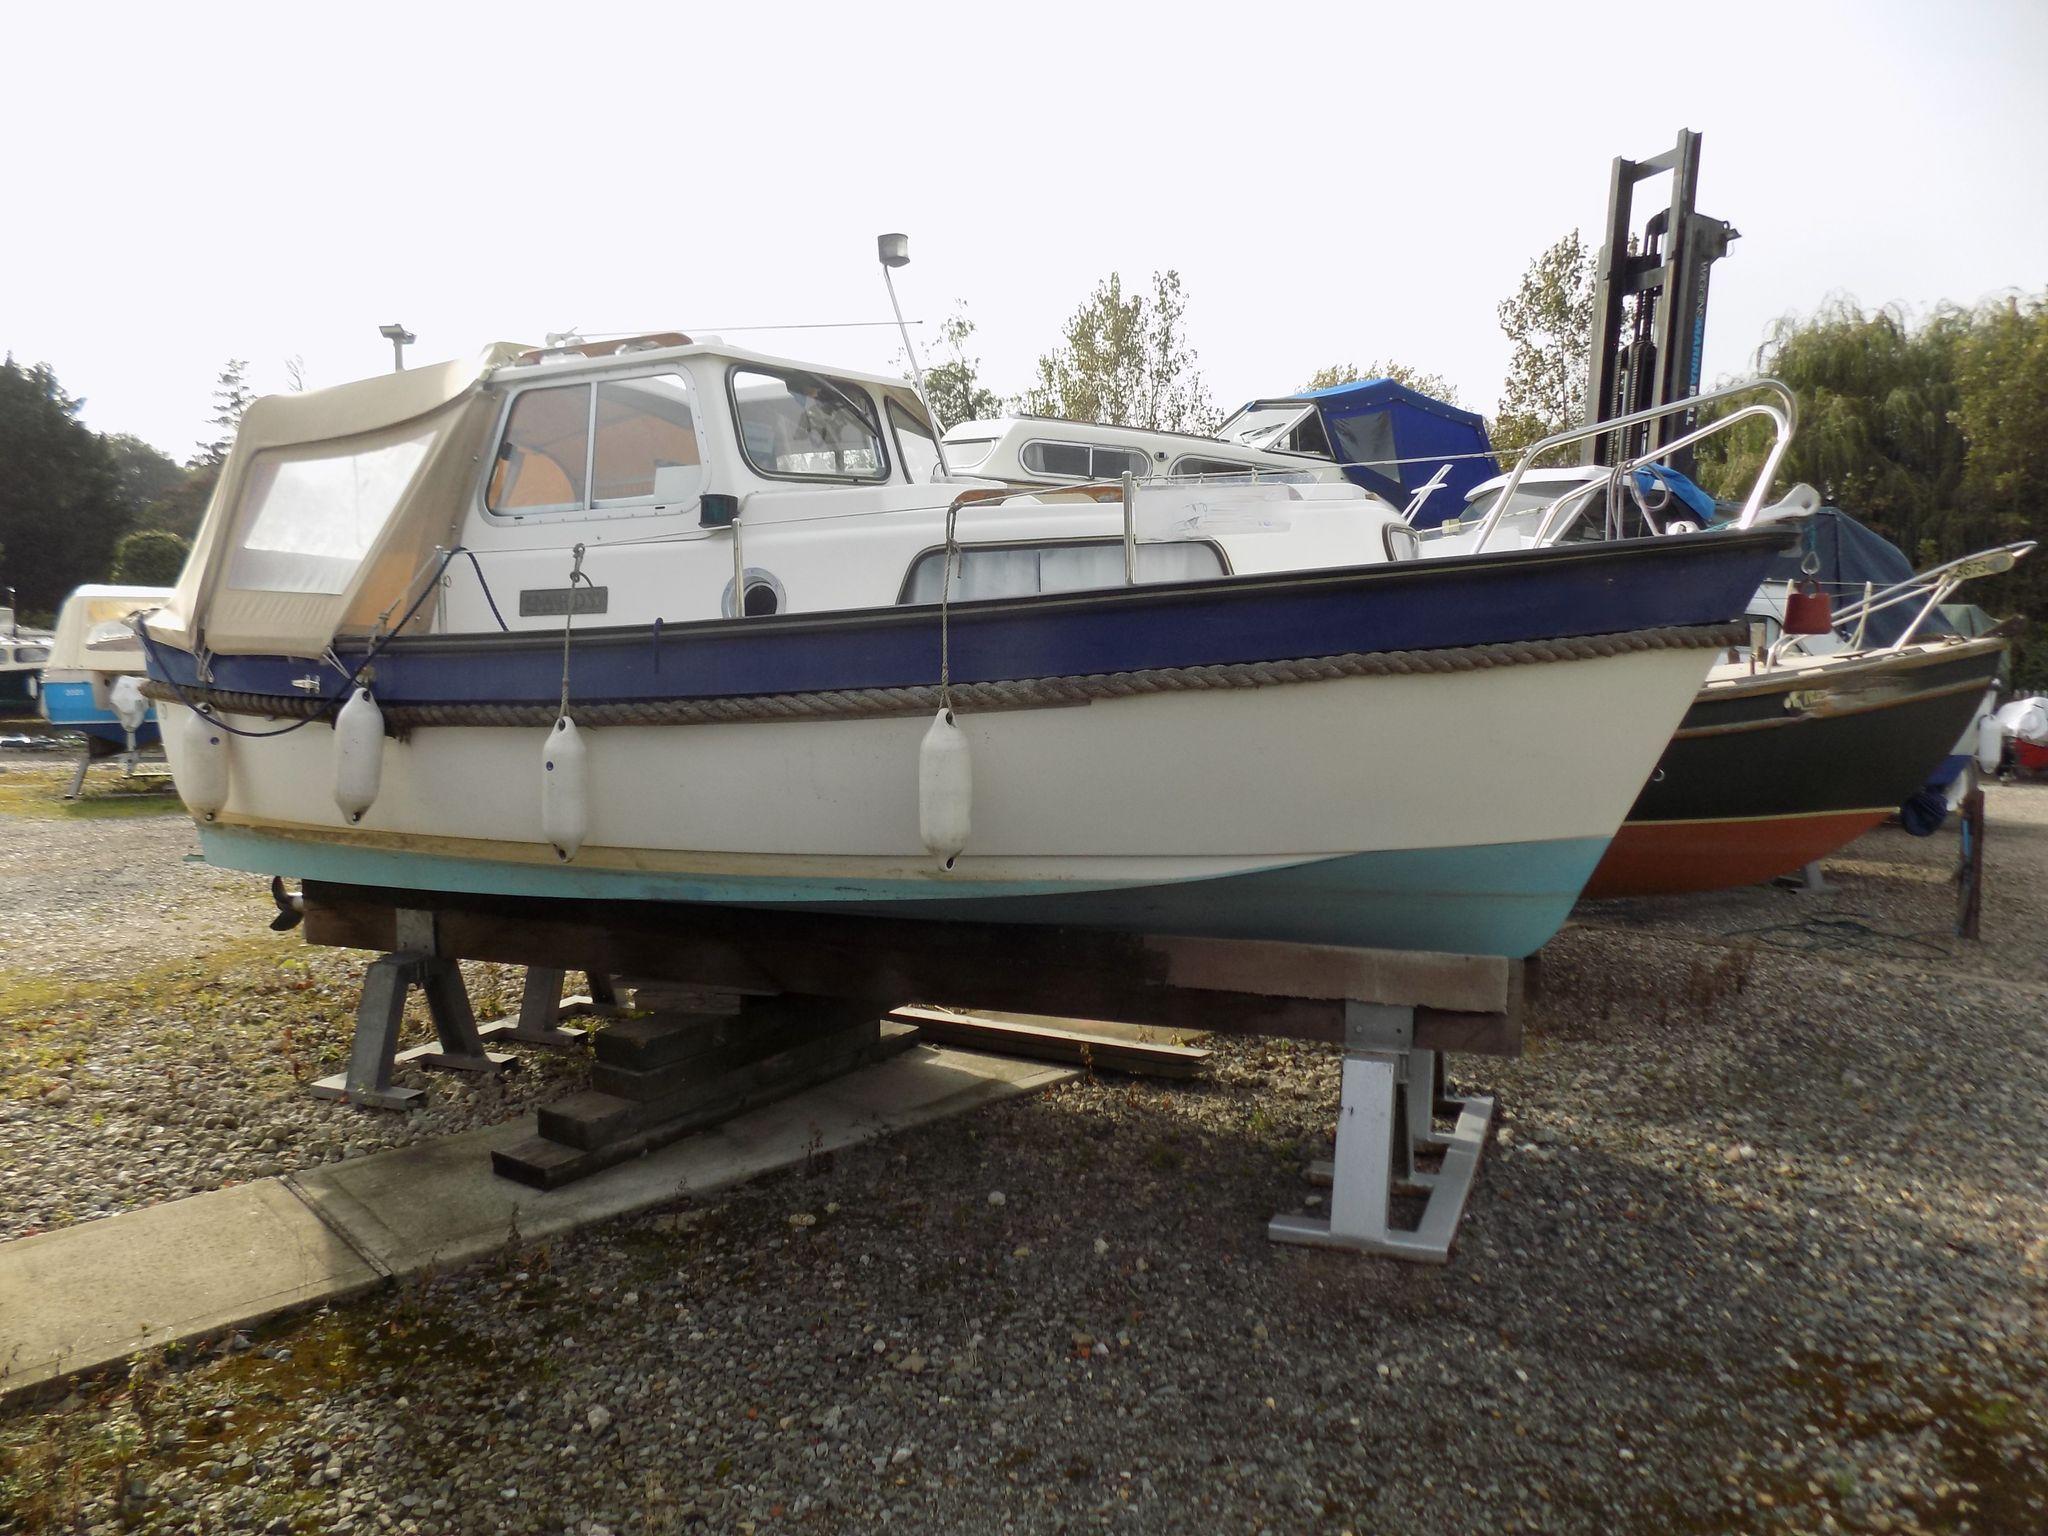 Fishing Boats For Sale in York, Acaster Marine Ltd